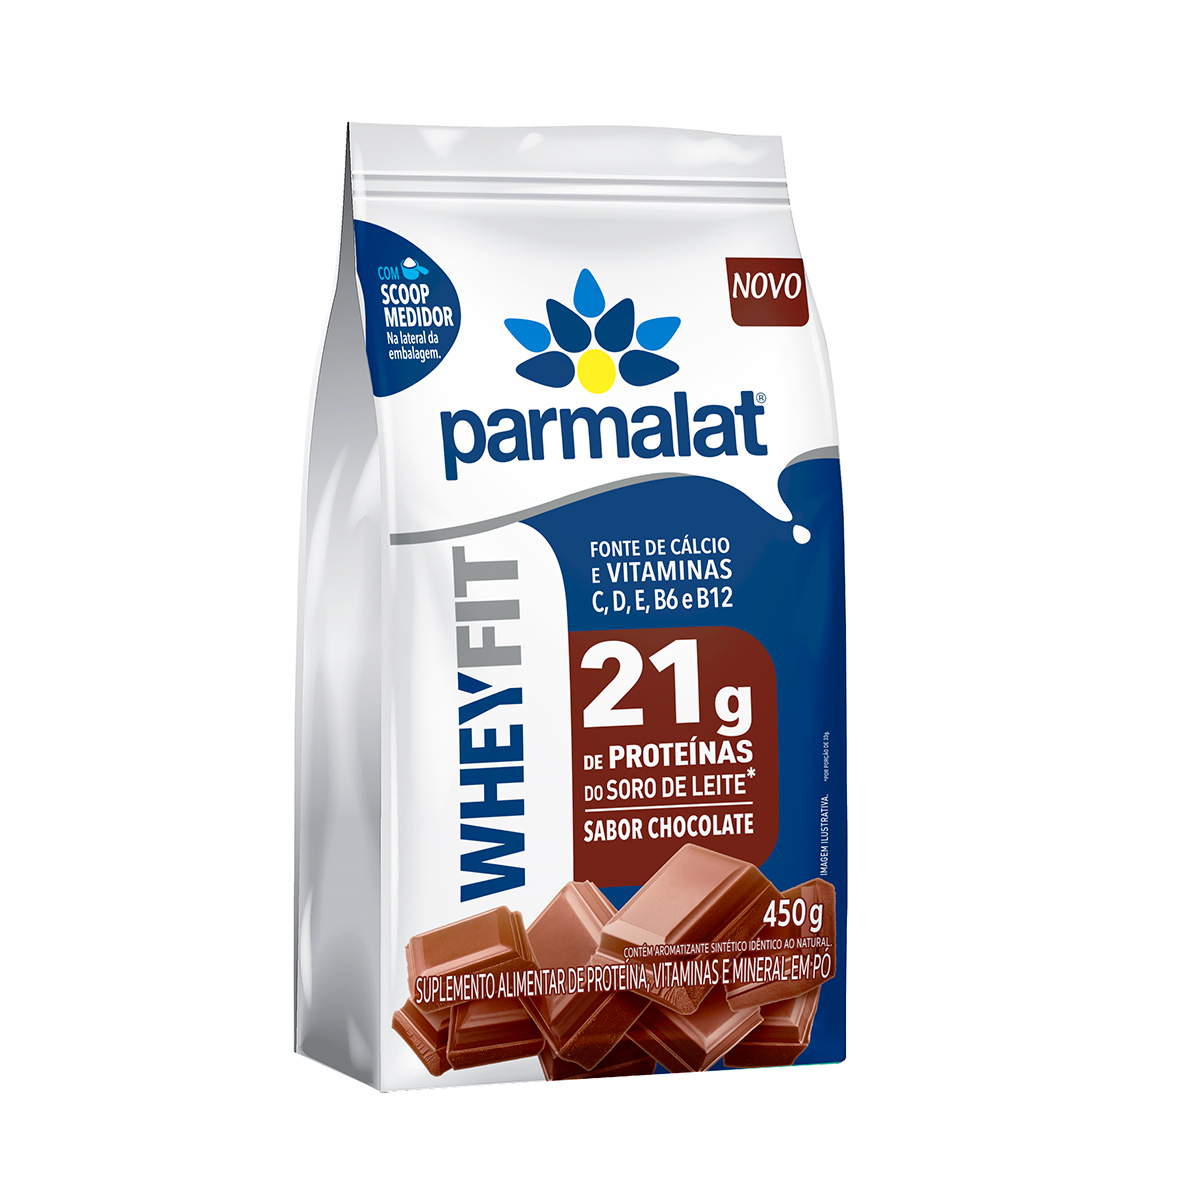 WHEY PROTEIN SABOR CHOCOLATE PARMALAT WHEYFIT 450G